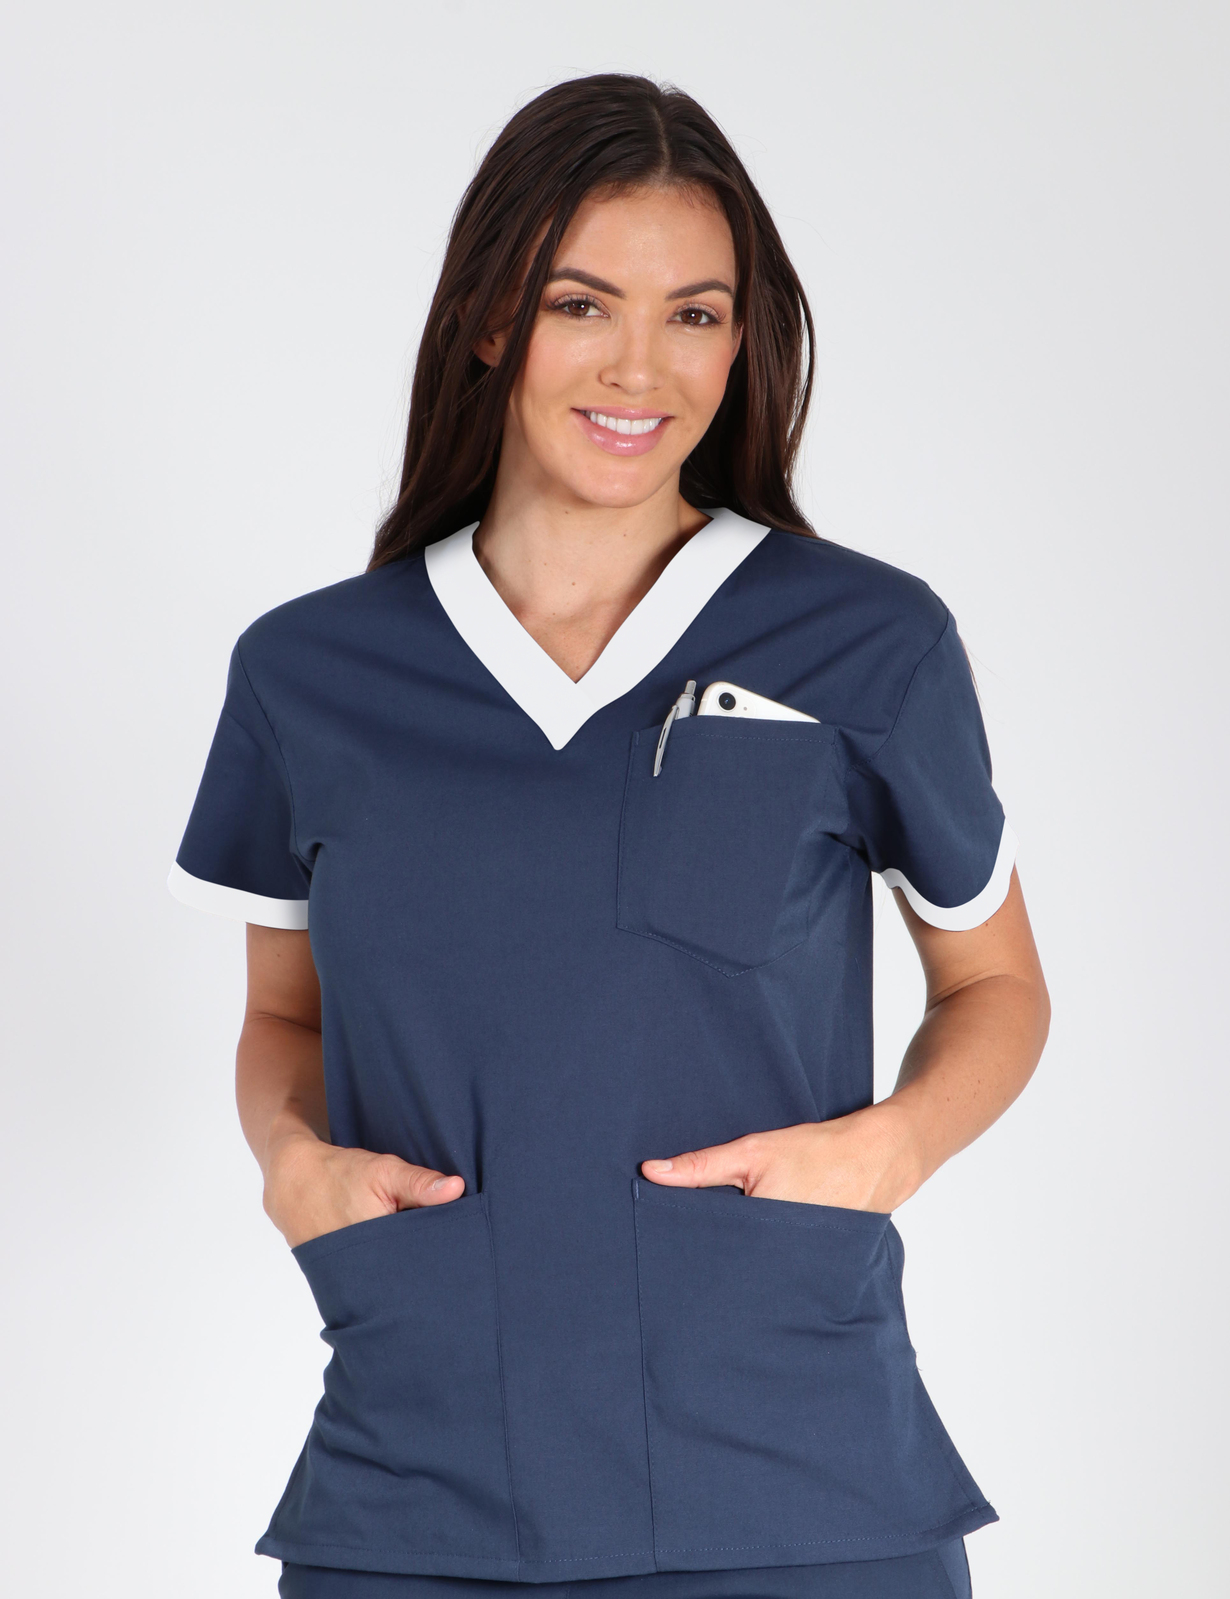 Perth Hospital - Enrolled Nurse (Contrast V-neck in Navy with White Trim and Cargo Pants incl Logos)